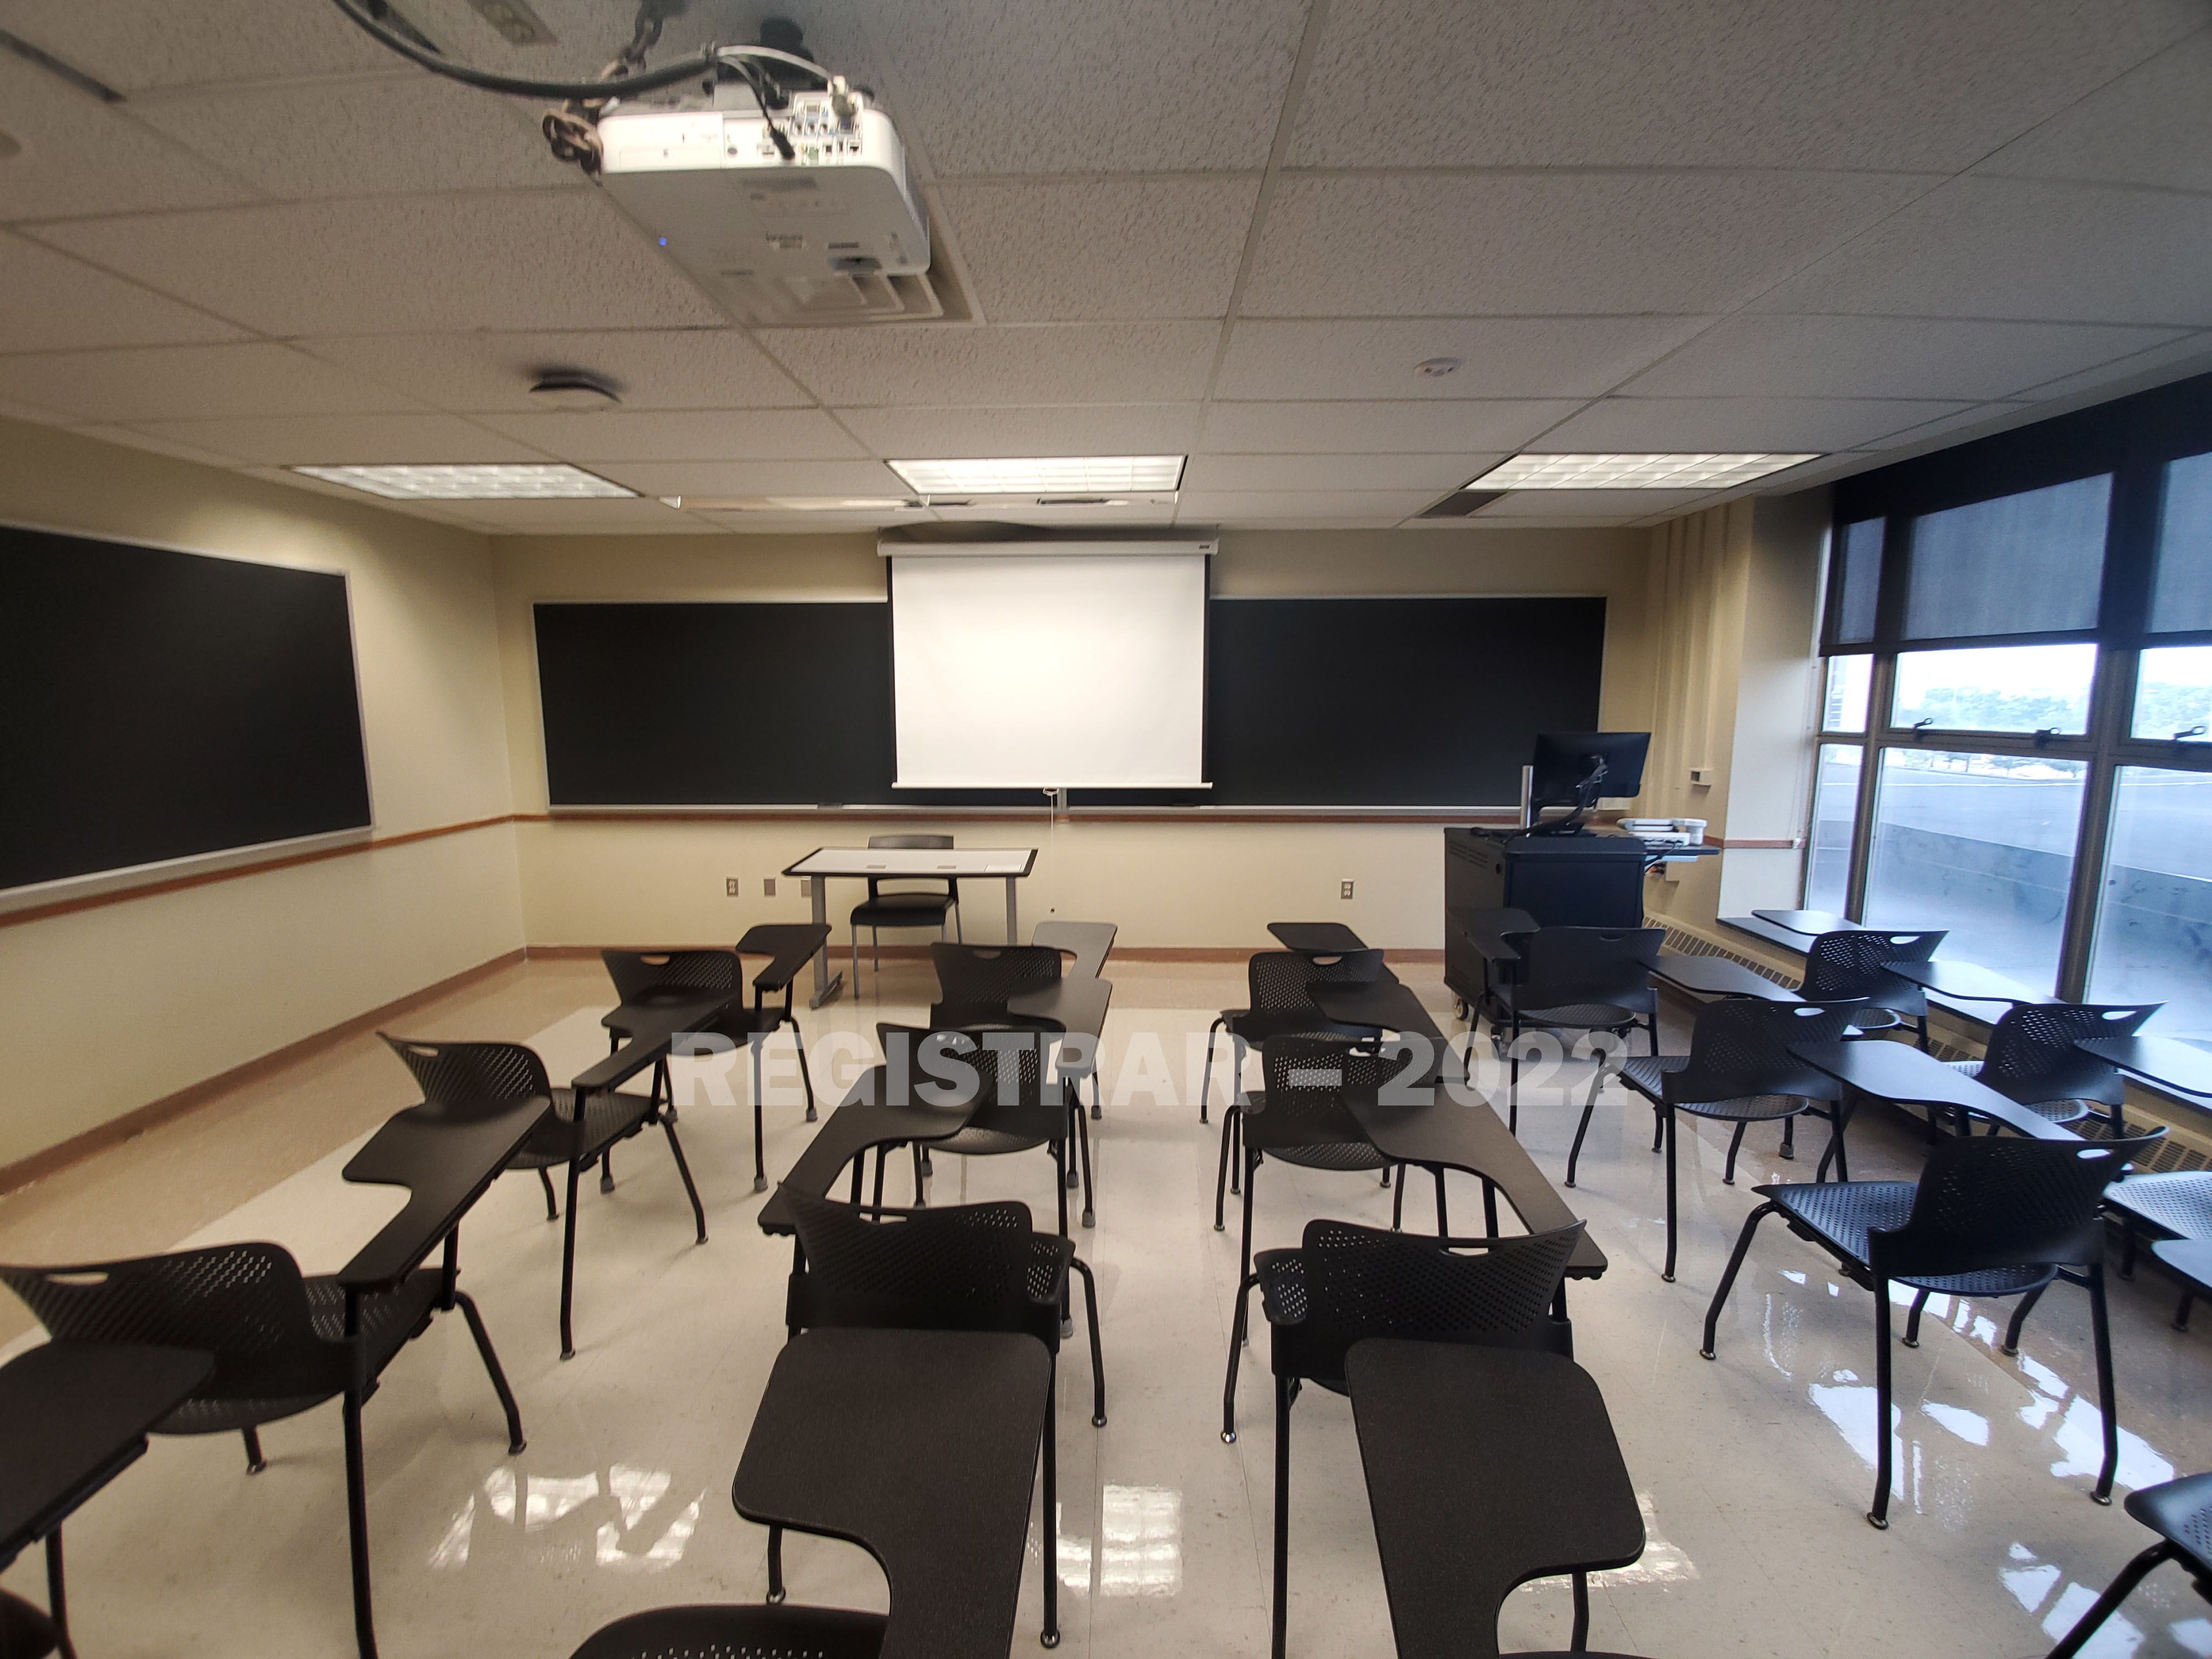 Enarson Classroom Building room 240 ultra wide angle view from the back of the room with projector screen down